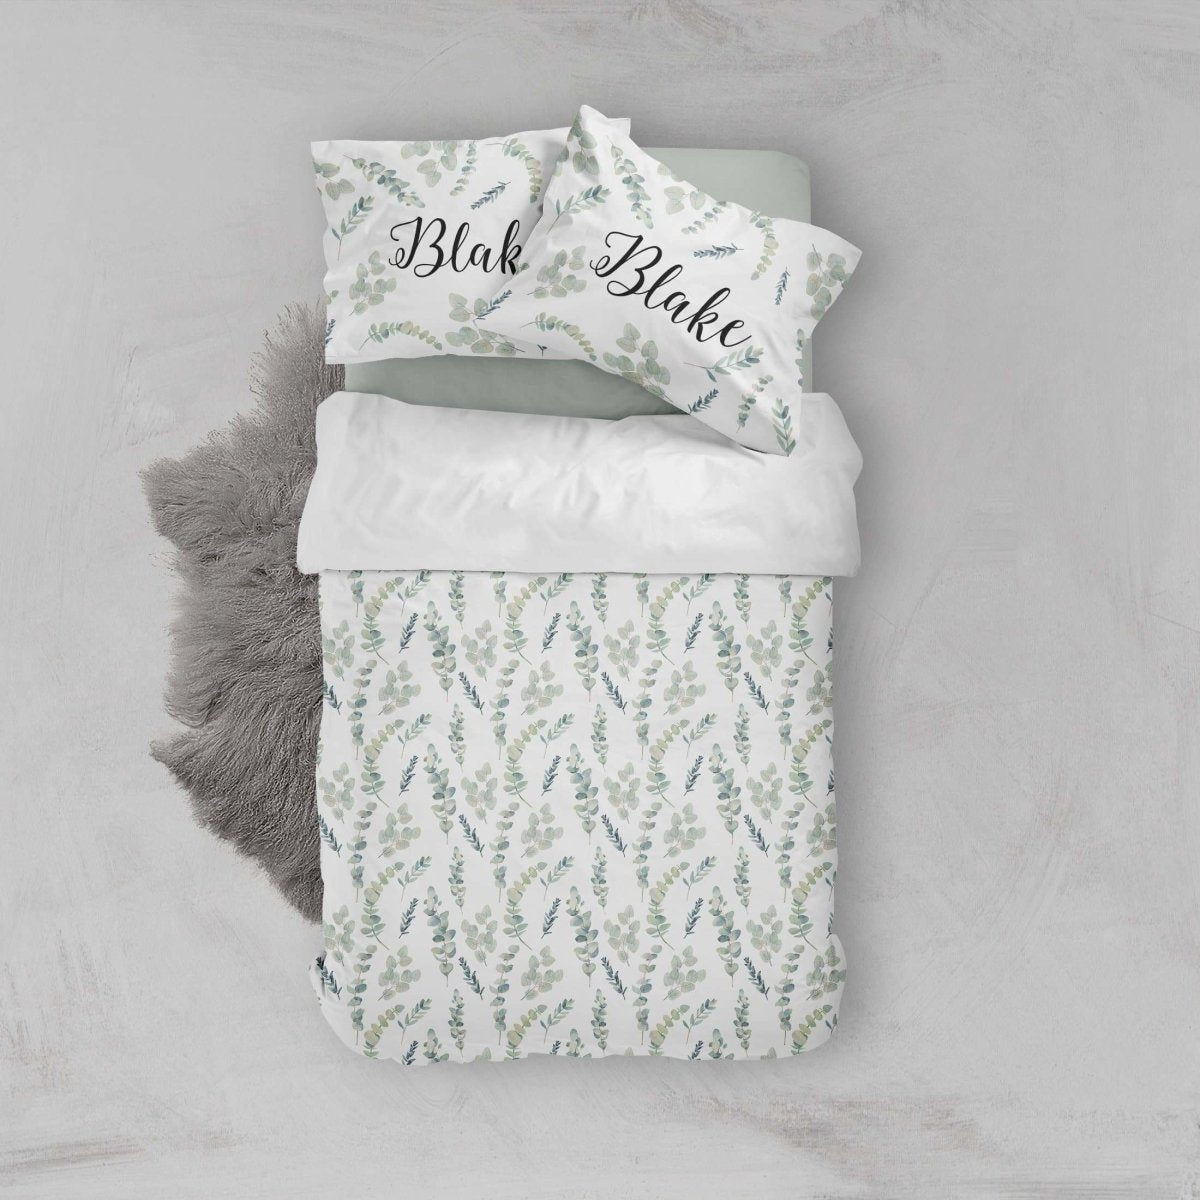 Personalized Greenery Kids Bedding Set (Comforter or Duvet Cover) - text, ,